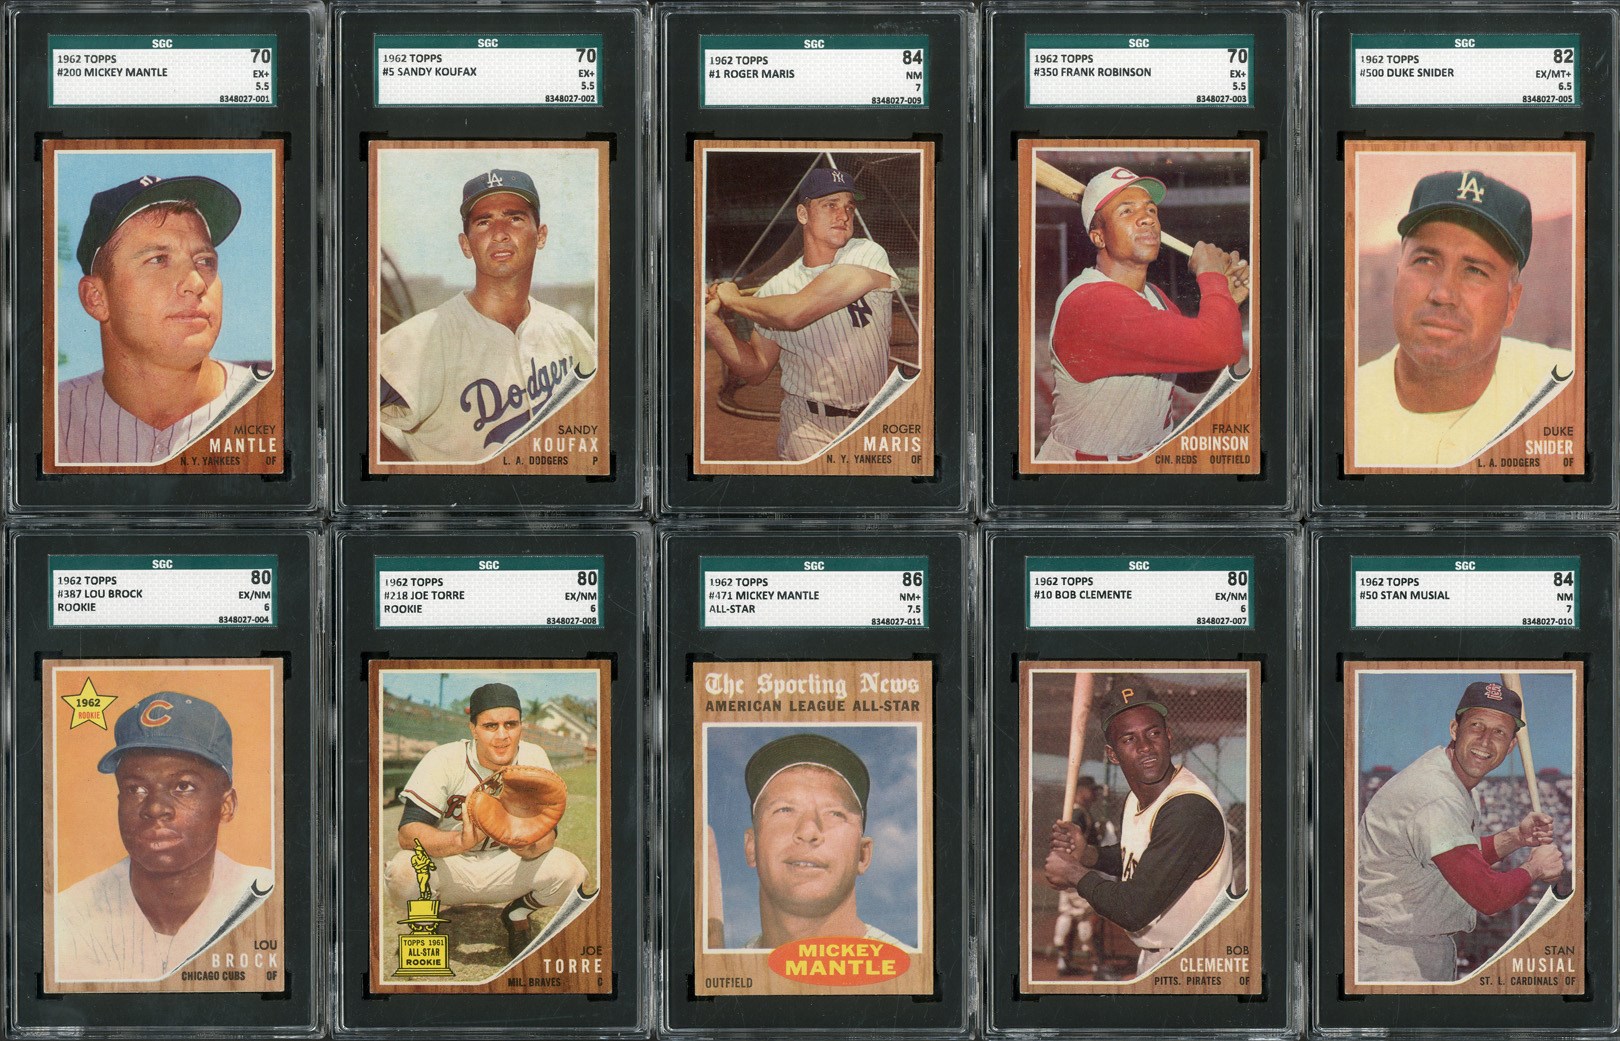 - 1962 Topps Complete Set of 598 Cards (11 SGC Graded)